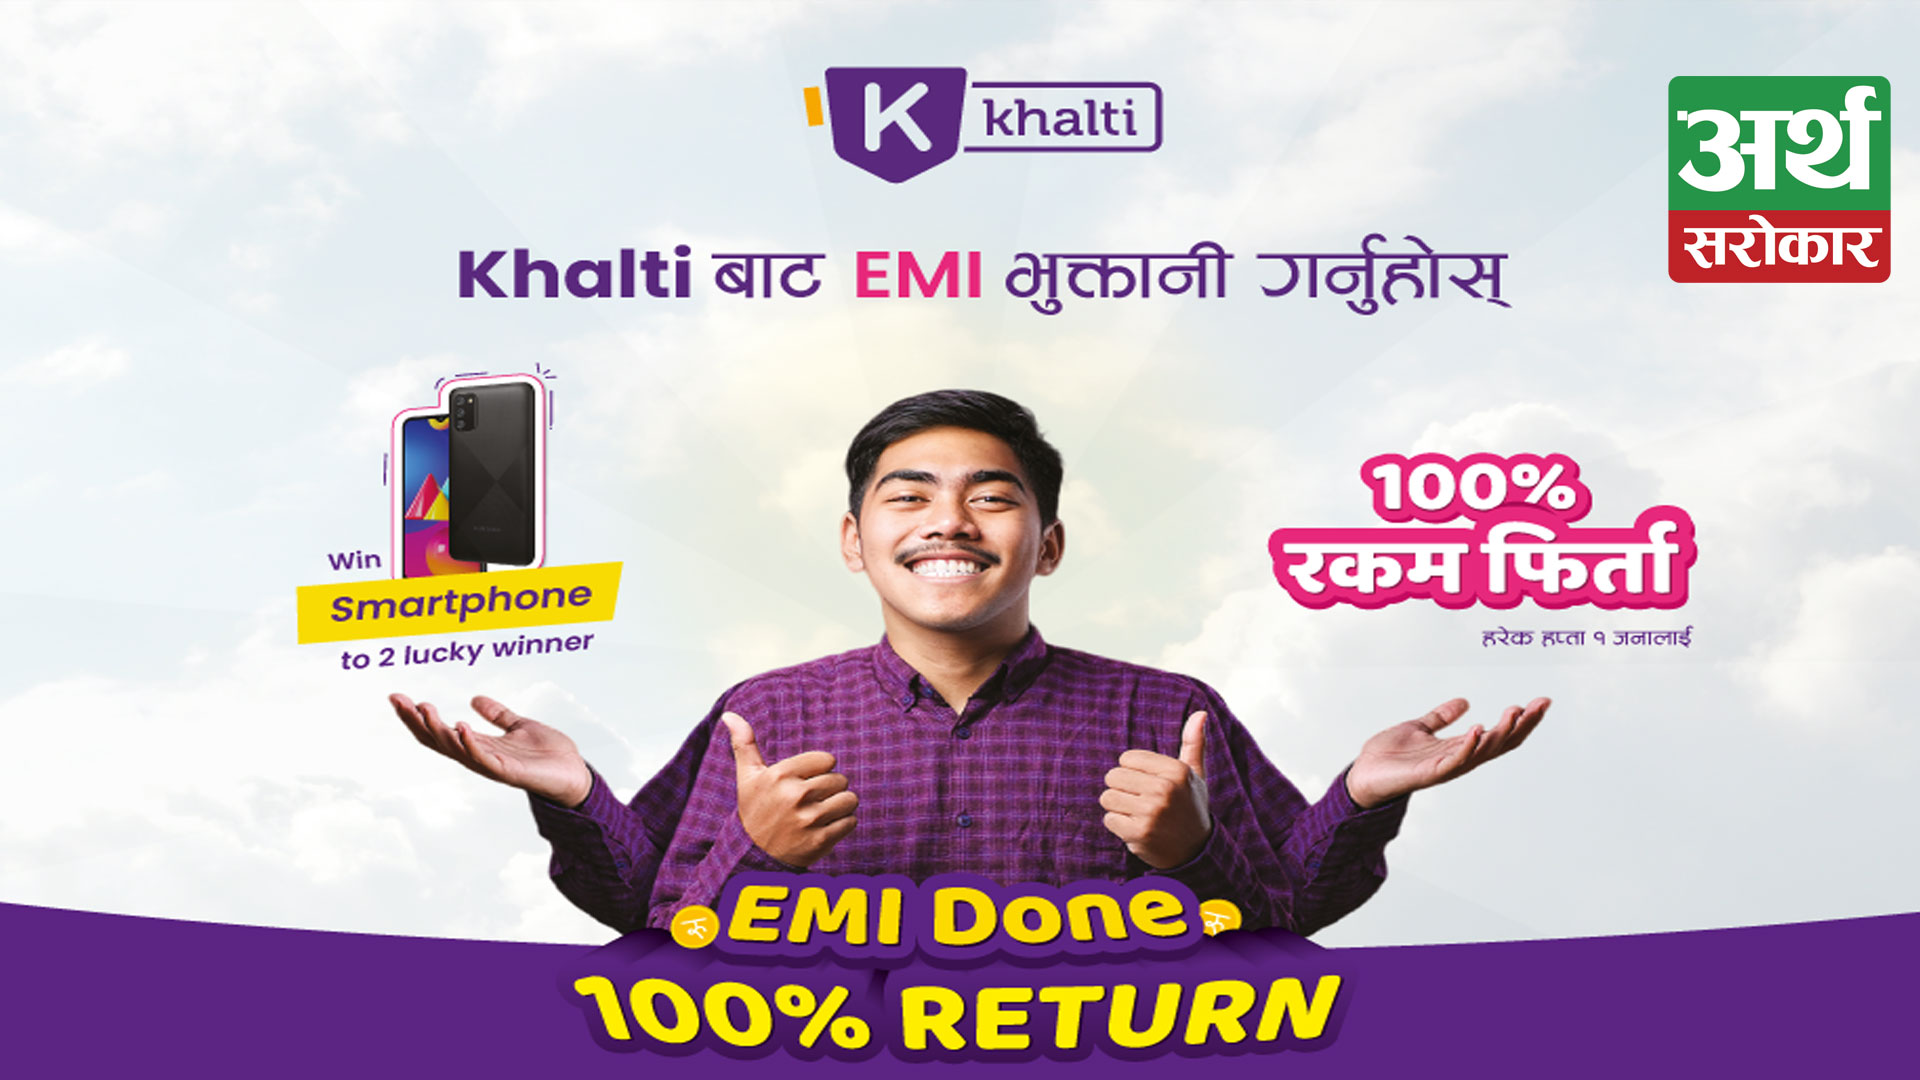 Chance to win 100% Return and Smartphone on EMI payment from Khalti